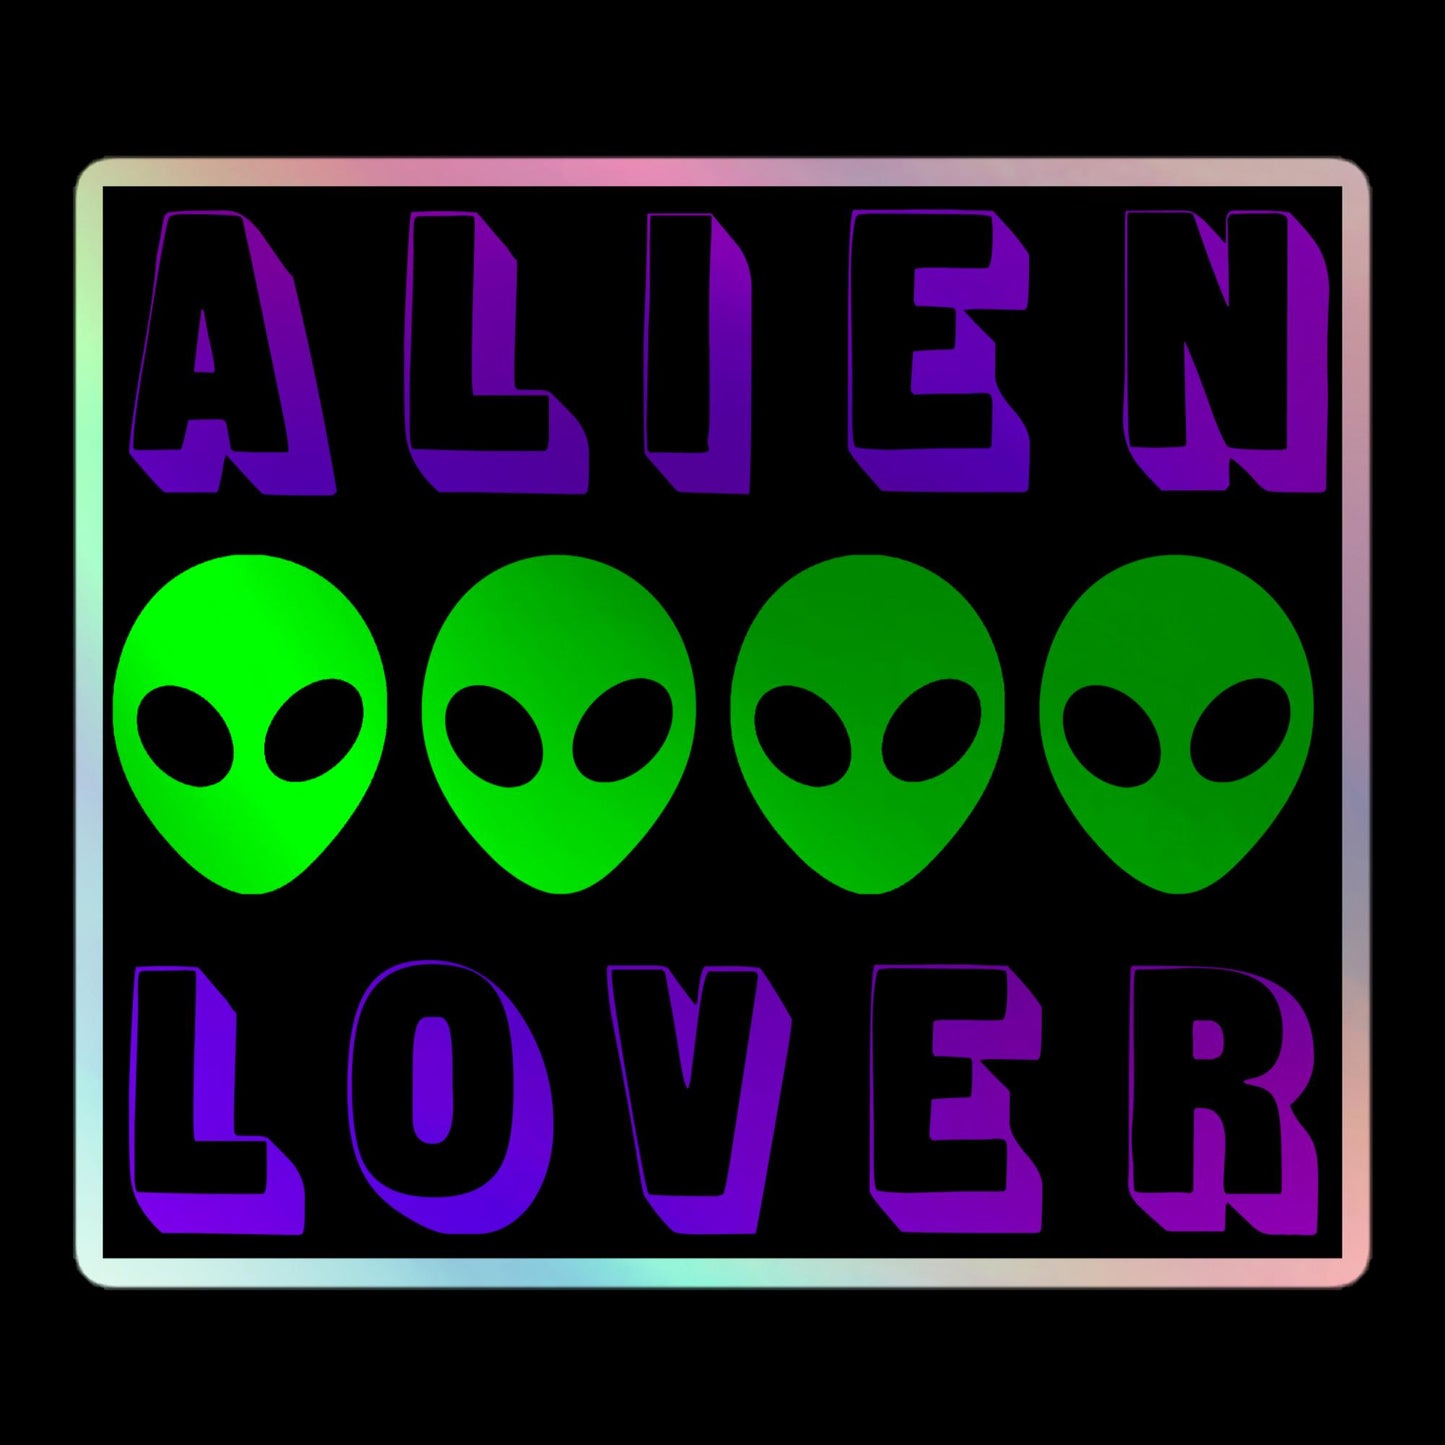 Alien Lover - Purple - Holographic Stickers